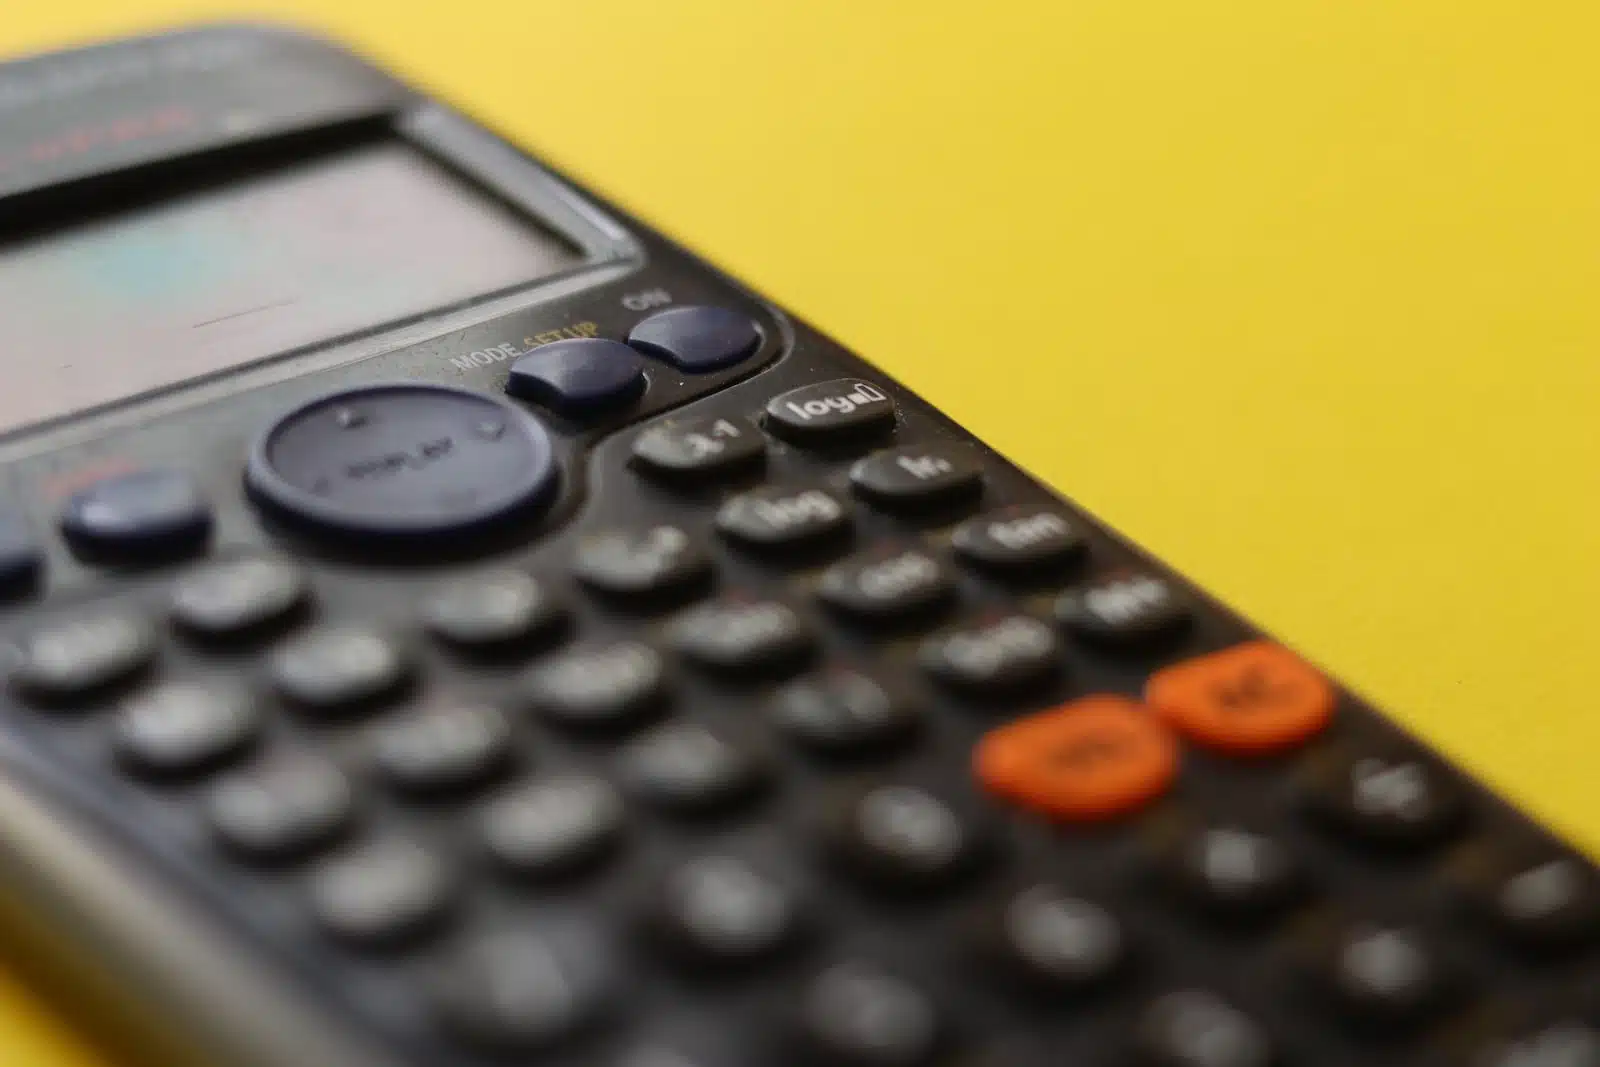 black remote control on yellow surface